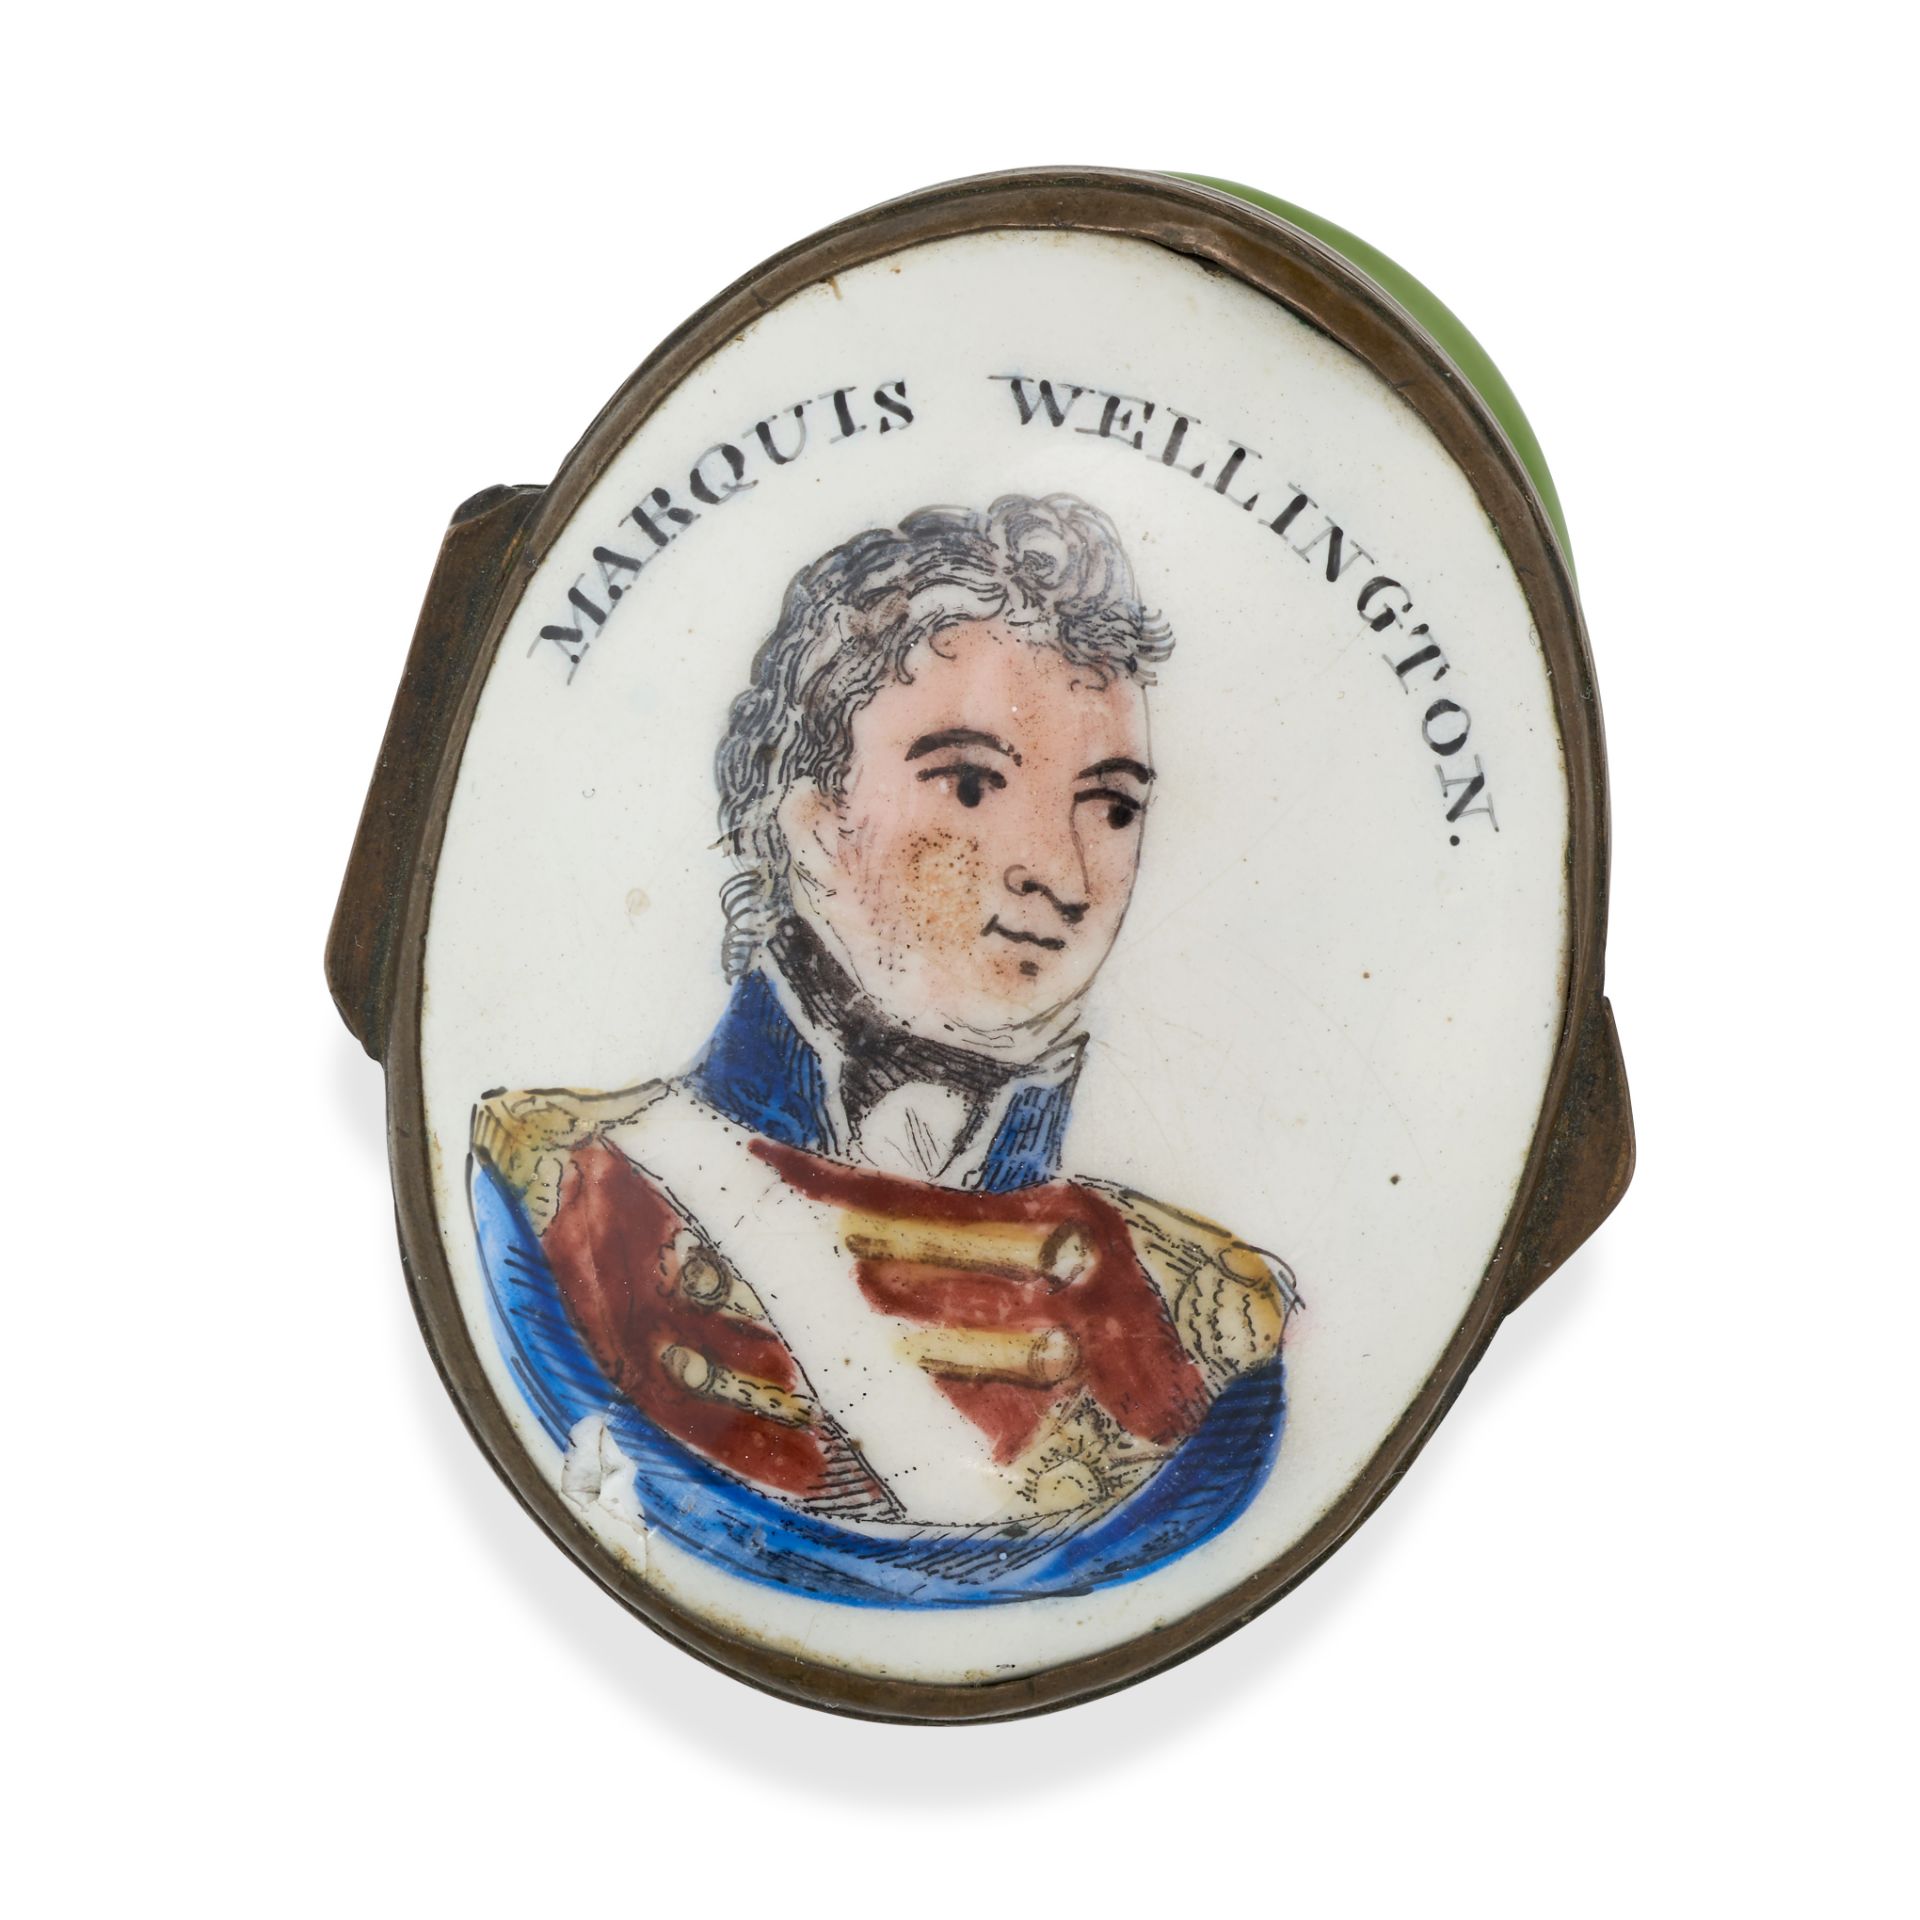 AN ANTIQUE DUKE OF WELLINGTON CERAMIC BOX the oval hinged box painted to depict The Duke of Welli...